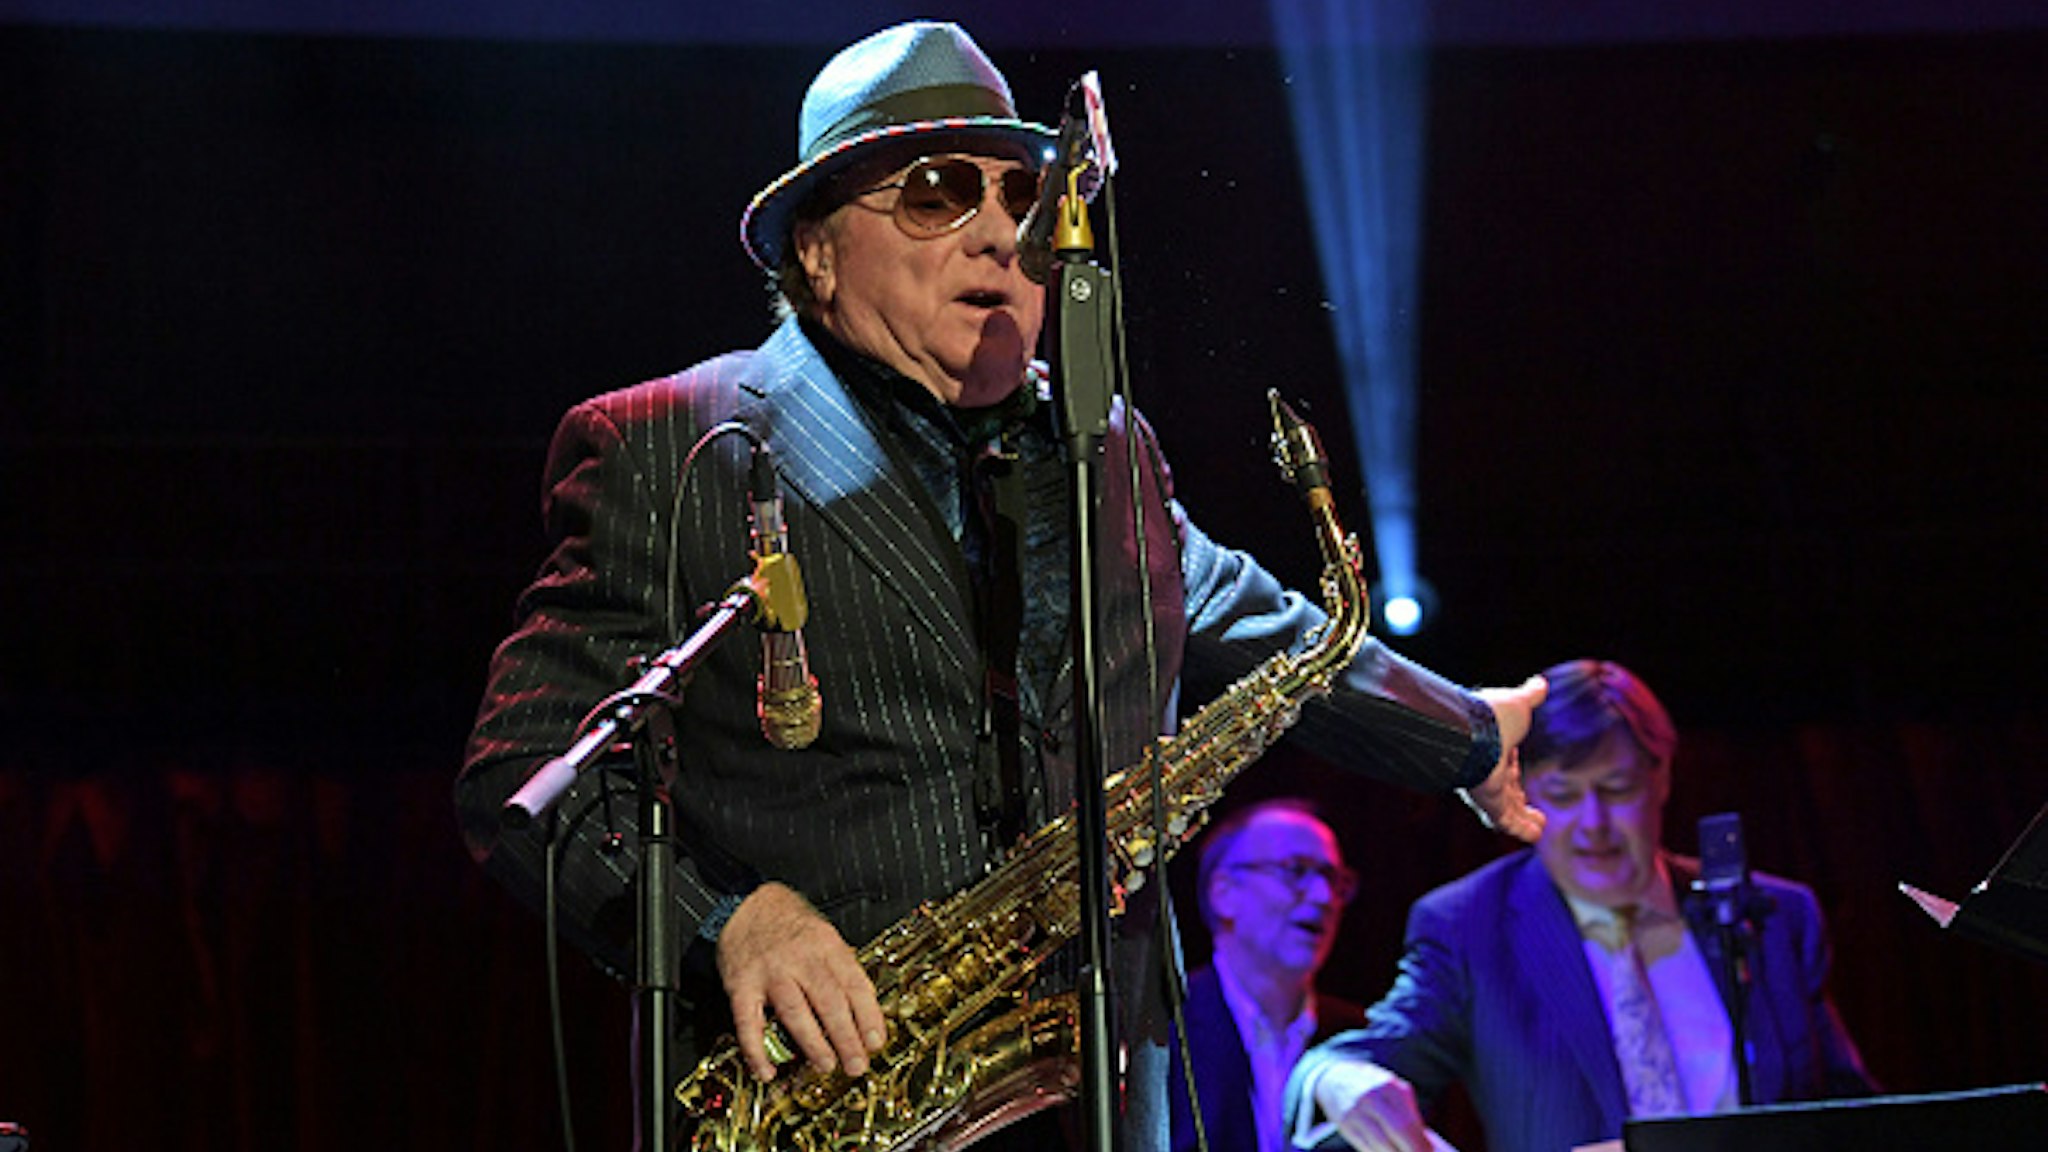 LONDON, ENGLAND - OCTOBER 30: Van Morrison performs at "A Night At Ronnie Scotts: 60th Anniversary Gala" at the Royal Albert Hall on October 30, 2019 in London, England.